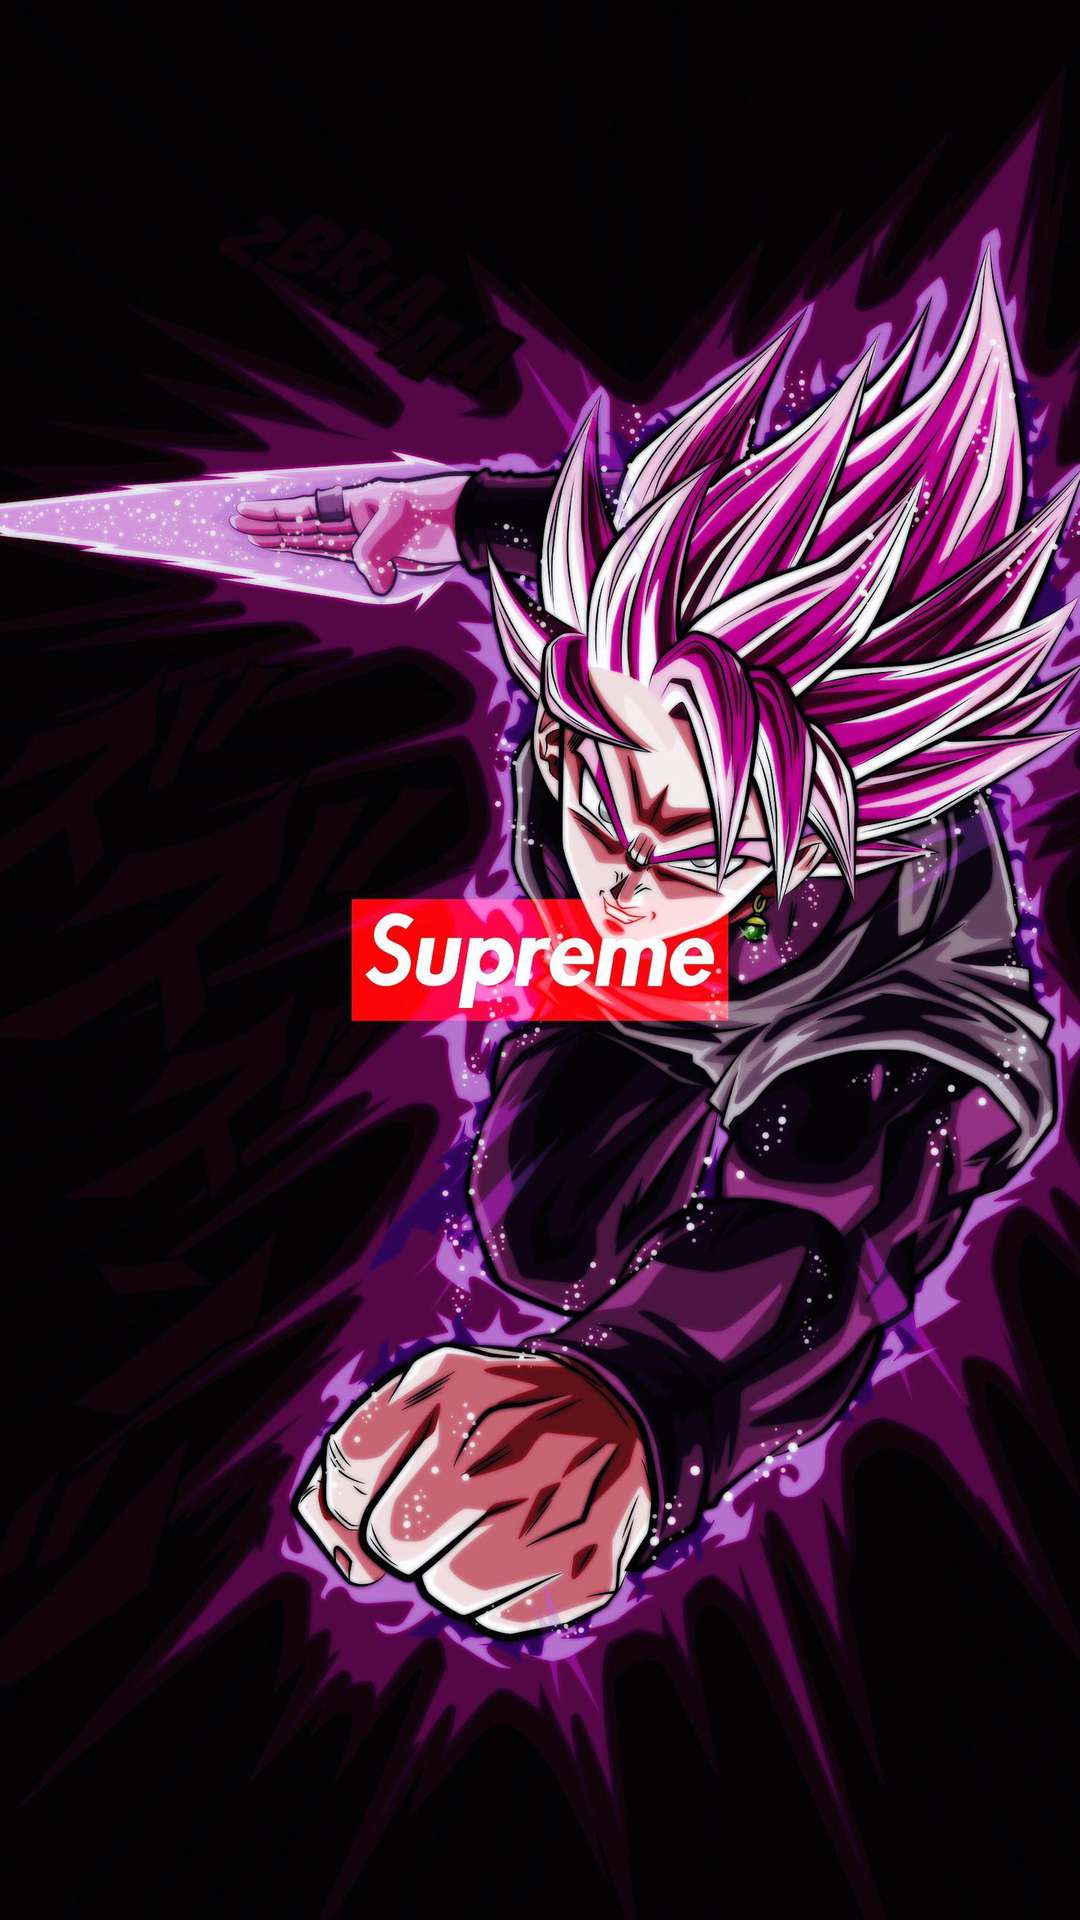 28+ Supreme Anime Wallpapers for iPhone and Android by Jordan Chan